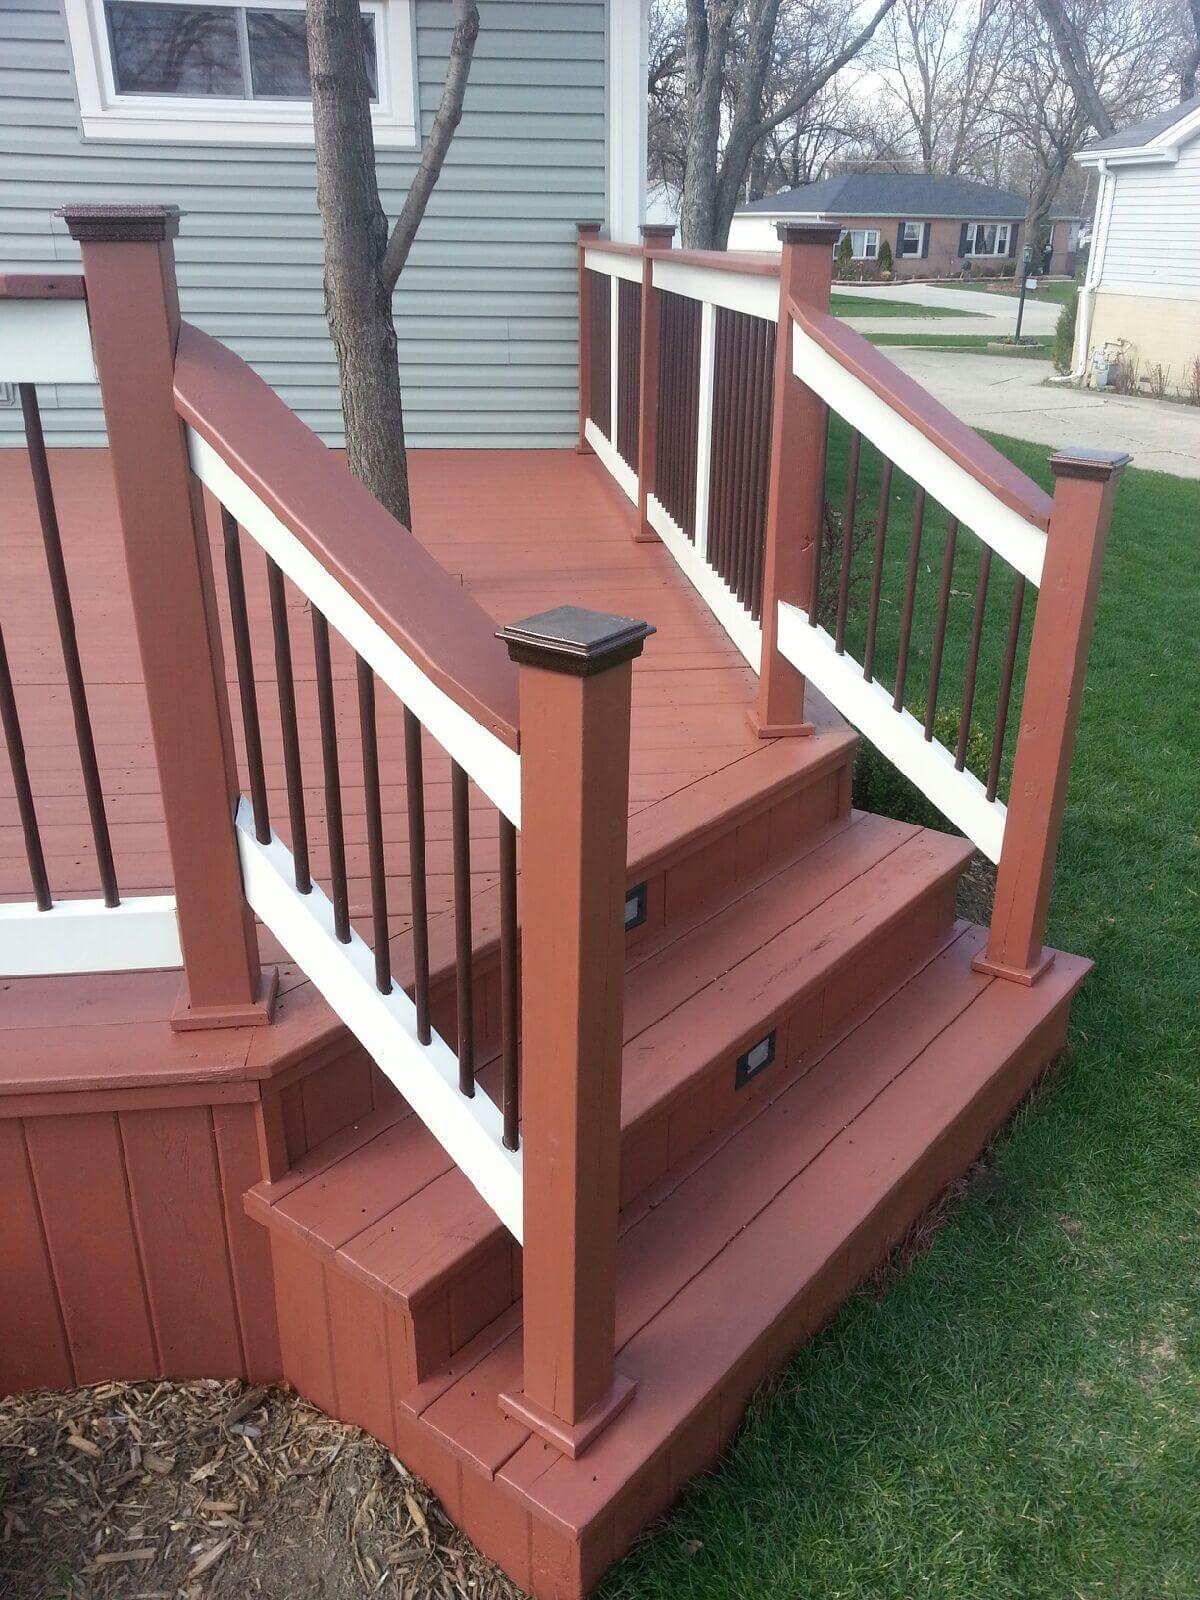 Repairs and maintenance for your deck, fence, and exterior wood staining. - Deck Staining Rolling Meadows - Deck Cleaning Services